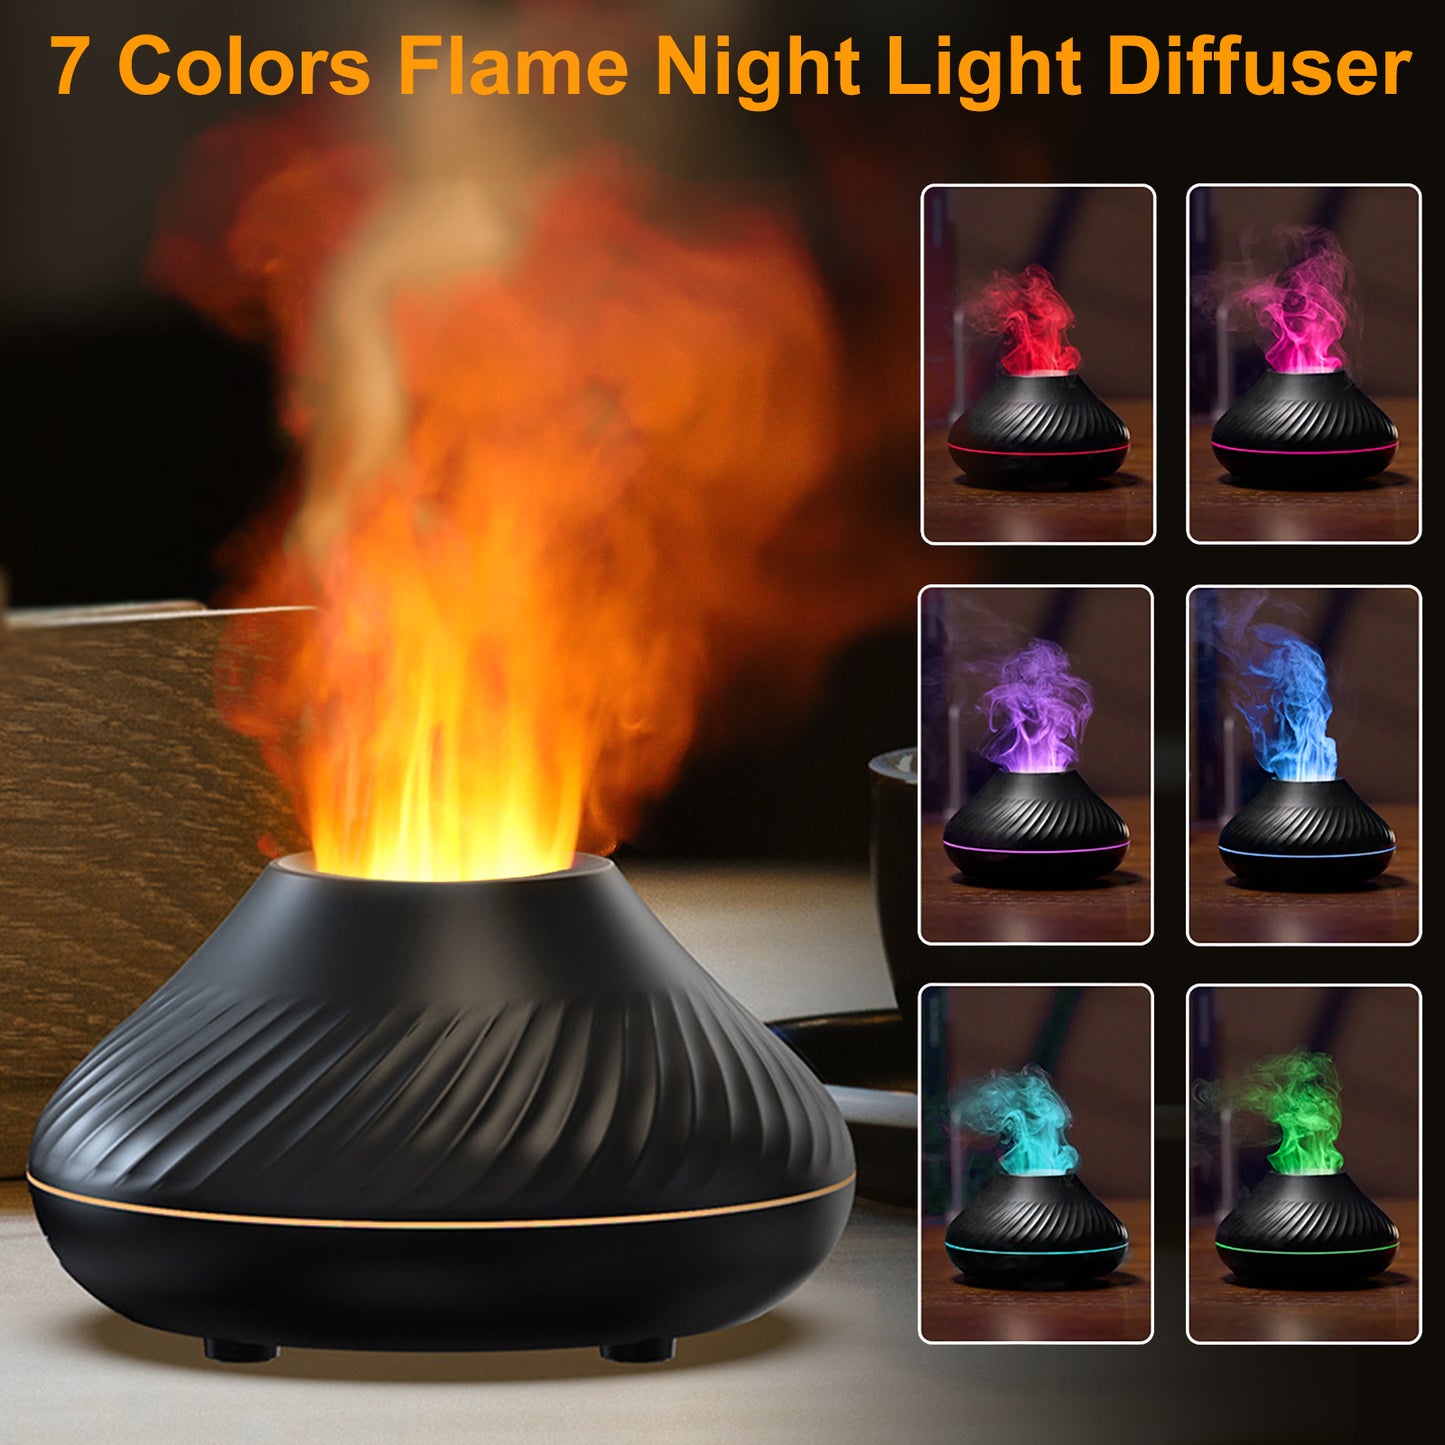 130 ml USB Air Humidifier Essential Oil Aroma Diffuser - 7 Flame Colors Noiseless Essential Oil Diffuser for Home,Office with Auto-Off Protection (Black)